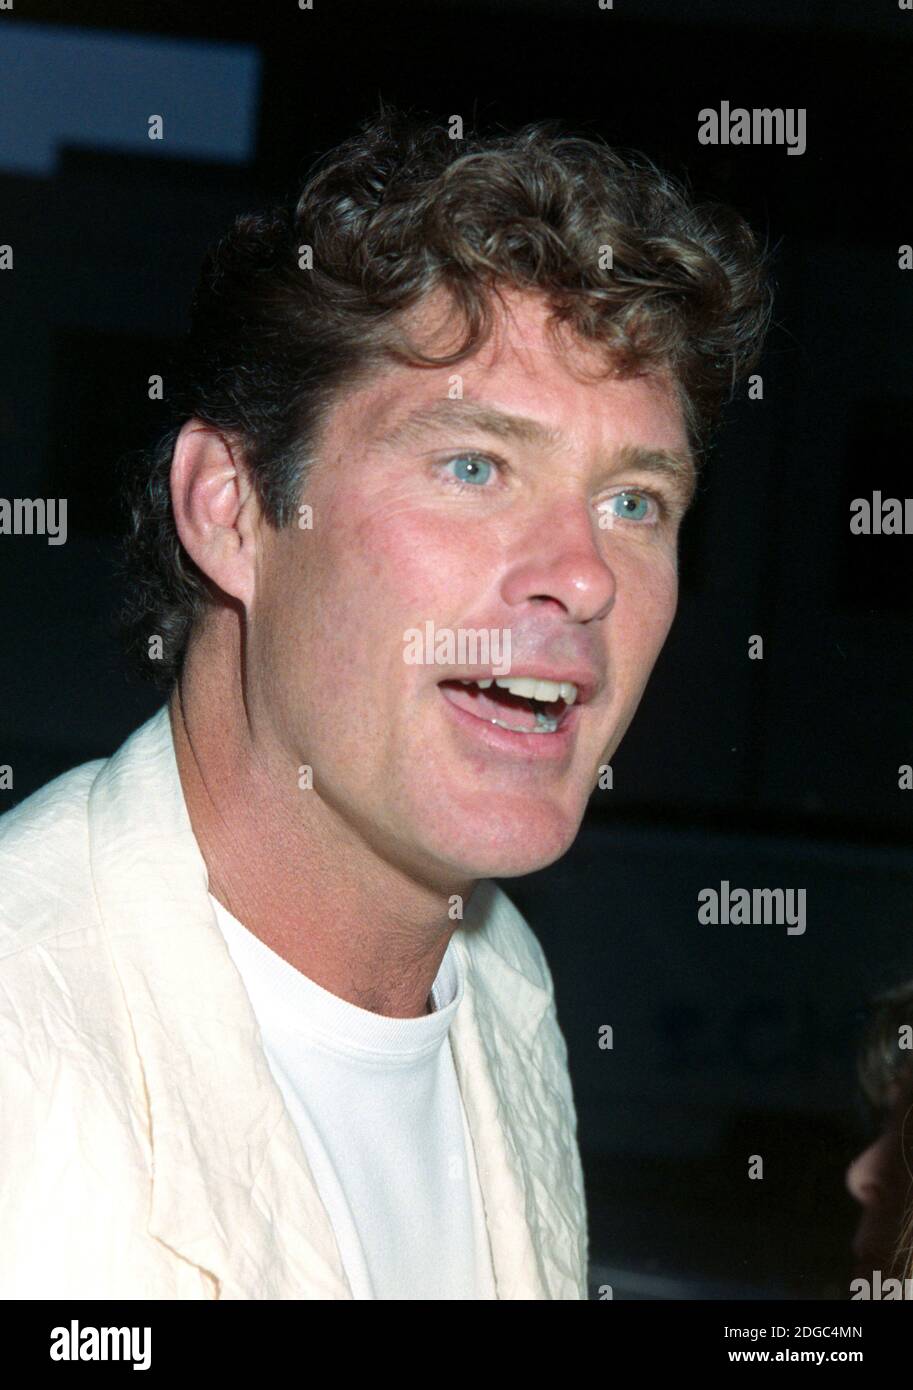 ARCHIVE: LOS ANGELES, CA. July 28, 1994: Actor David Hasselhoff at the premiere of 'The Mask' in Los Angeles. File photo © Paul Smith/Featureflash Stock Photo